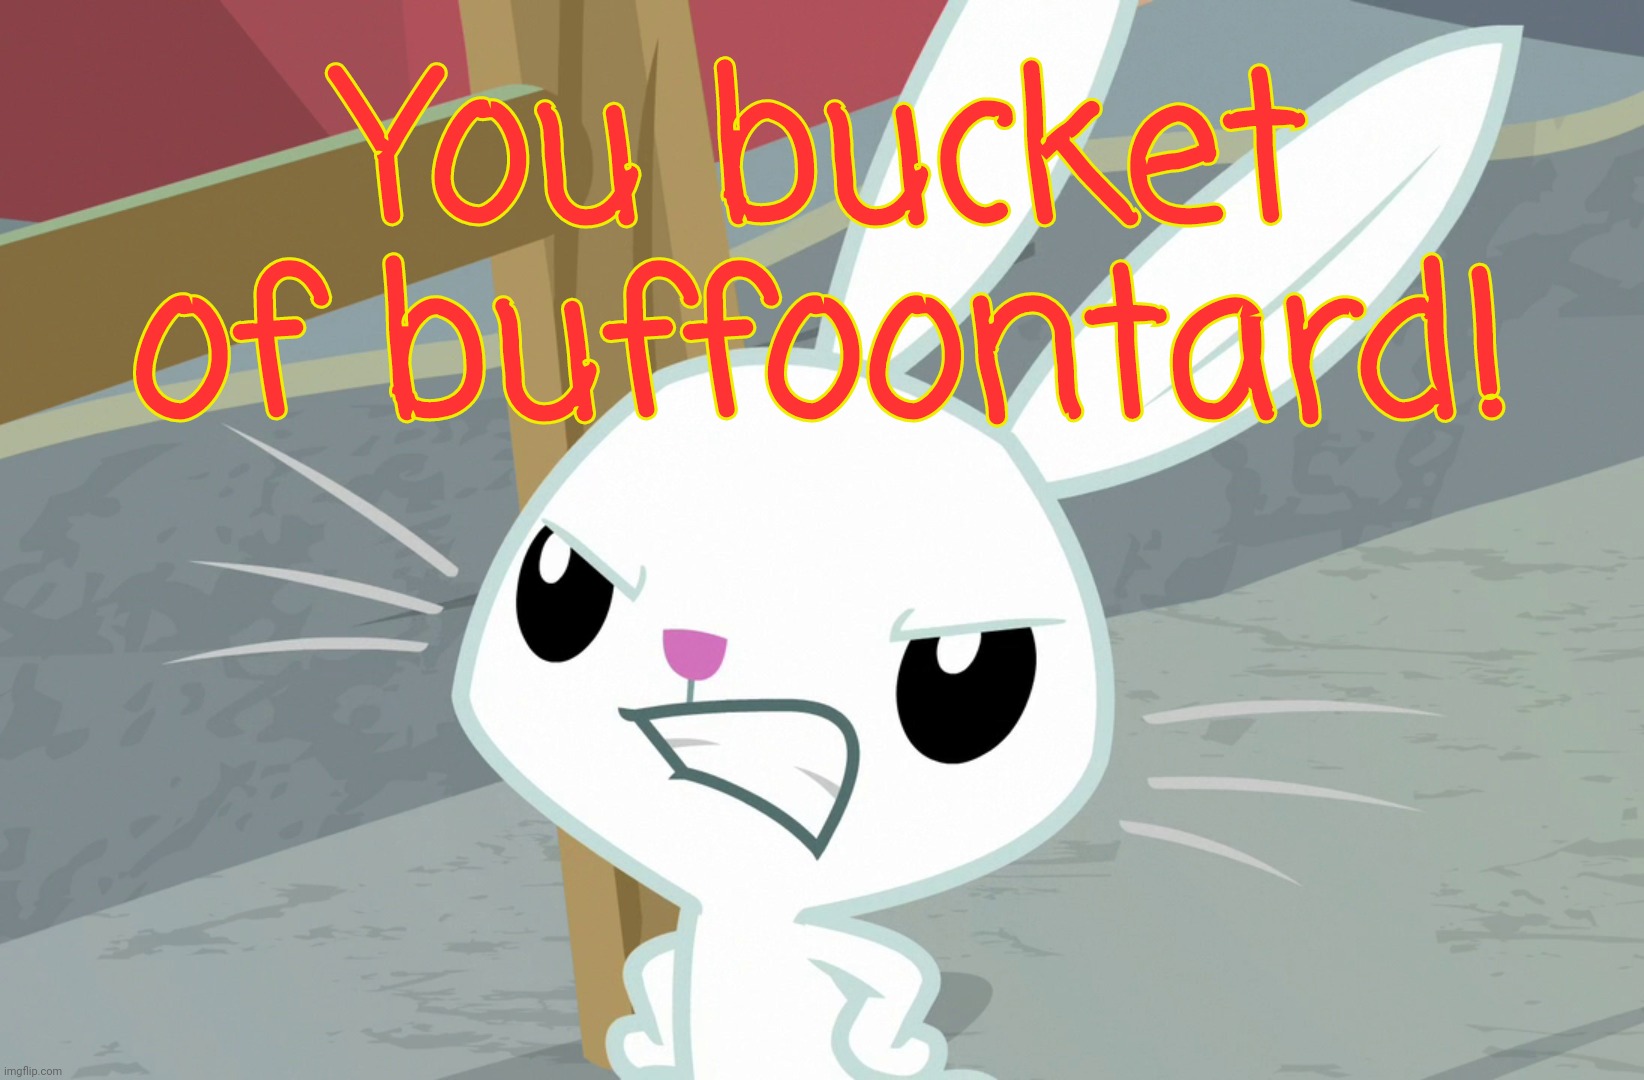 Pissed Angel Bunny | You bucket of buffoontard! | image tagged in pissed angel bunny | made w/ Imgflip meme maker